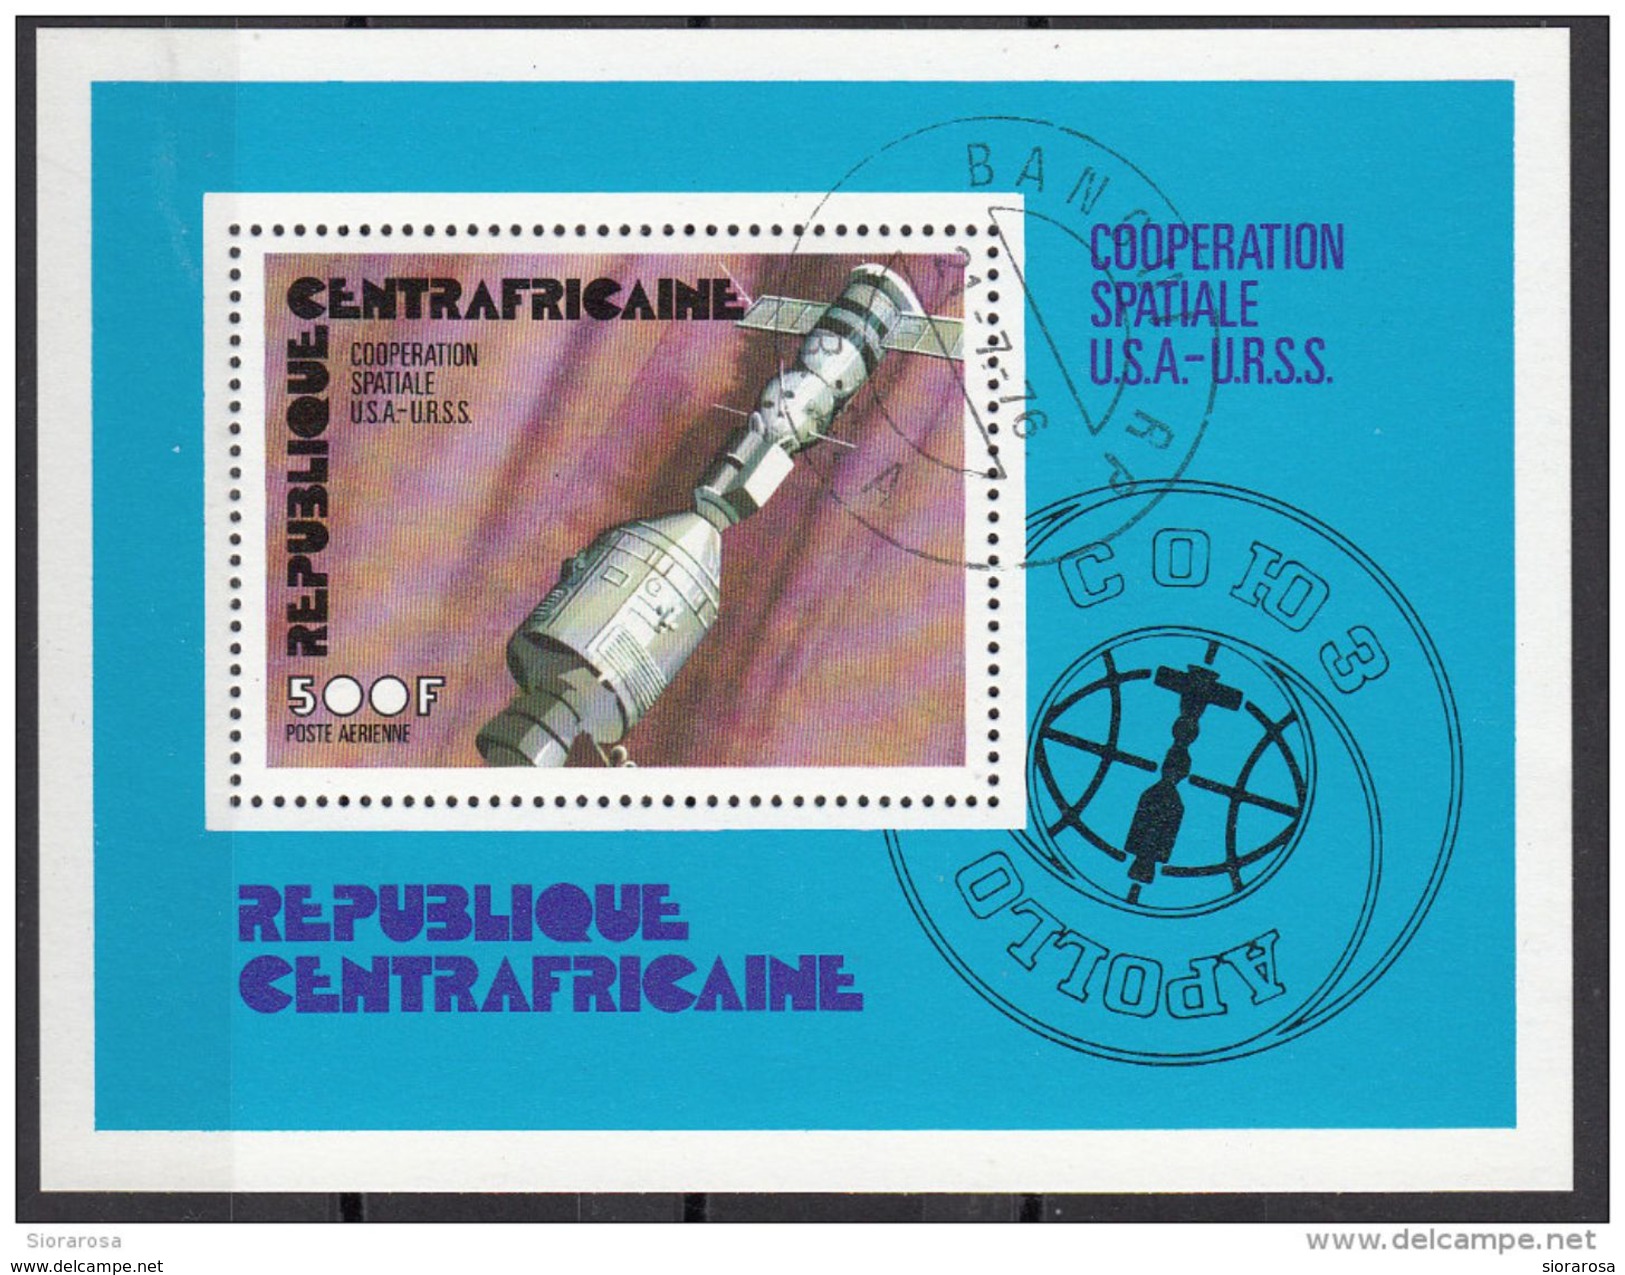 C138 Republique Centroafricaine 1976 Apollo And Soyuz After Link-up Cooperazione USA URSS Sheet - Africa